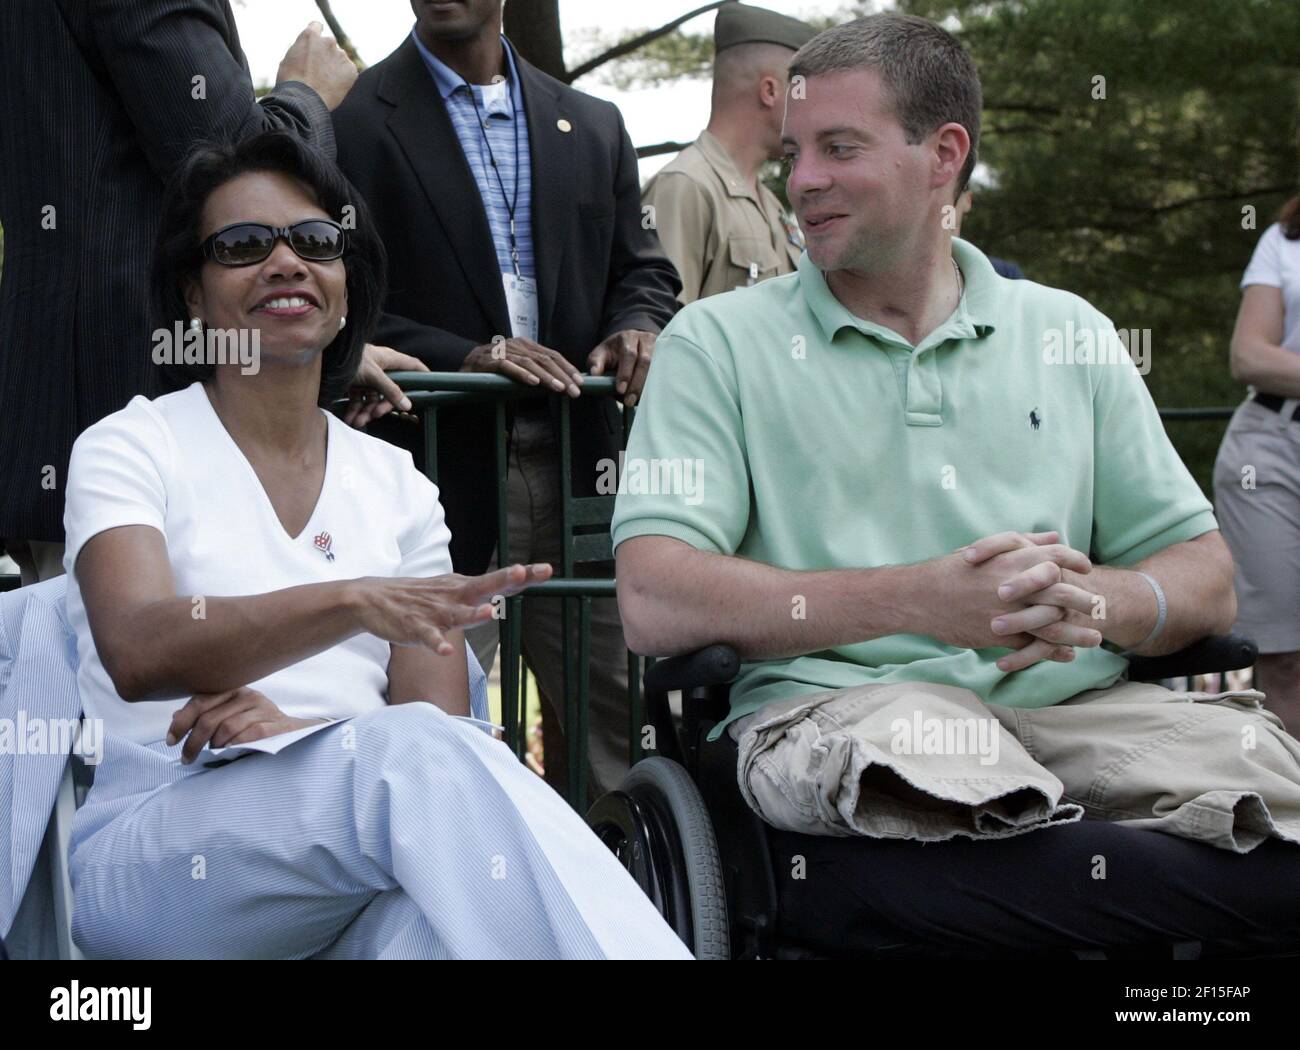 U.S. Secretary of State Condoleezza Rice talks with U.S. Marine Lance Corporal Josh Bleill, who was seriously wounded in Iraq, as they watch the second round of the AT&T National tournament from the 16th hole at Congressional Country Club in Bethesda, Maryland, Friday, July 6, 2007. (Photo by Saul Loeb/MCT/Sipa USA) Stock Photo